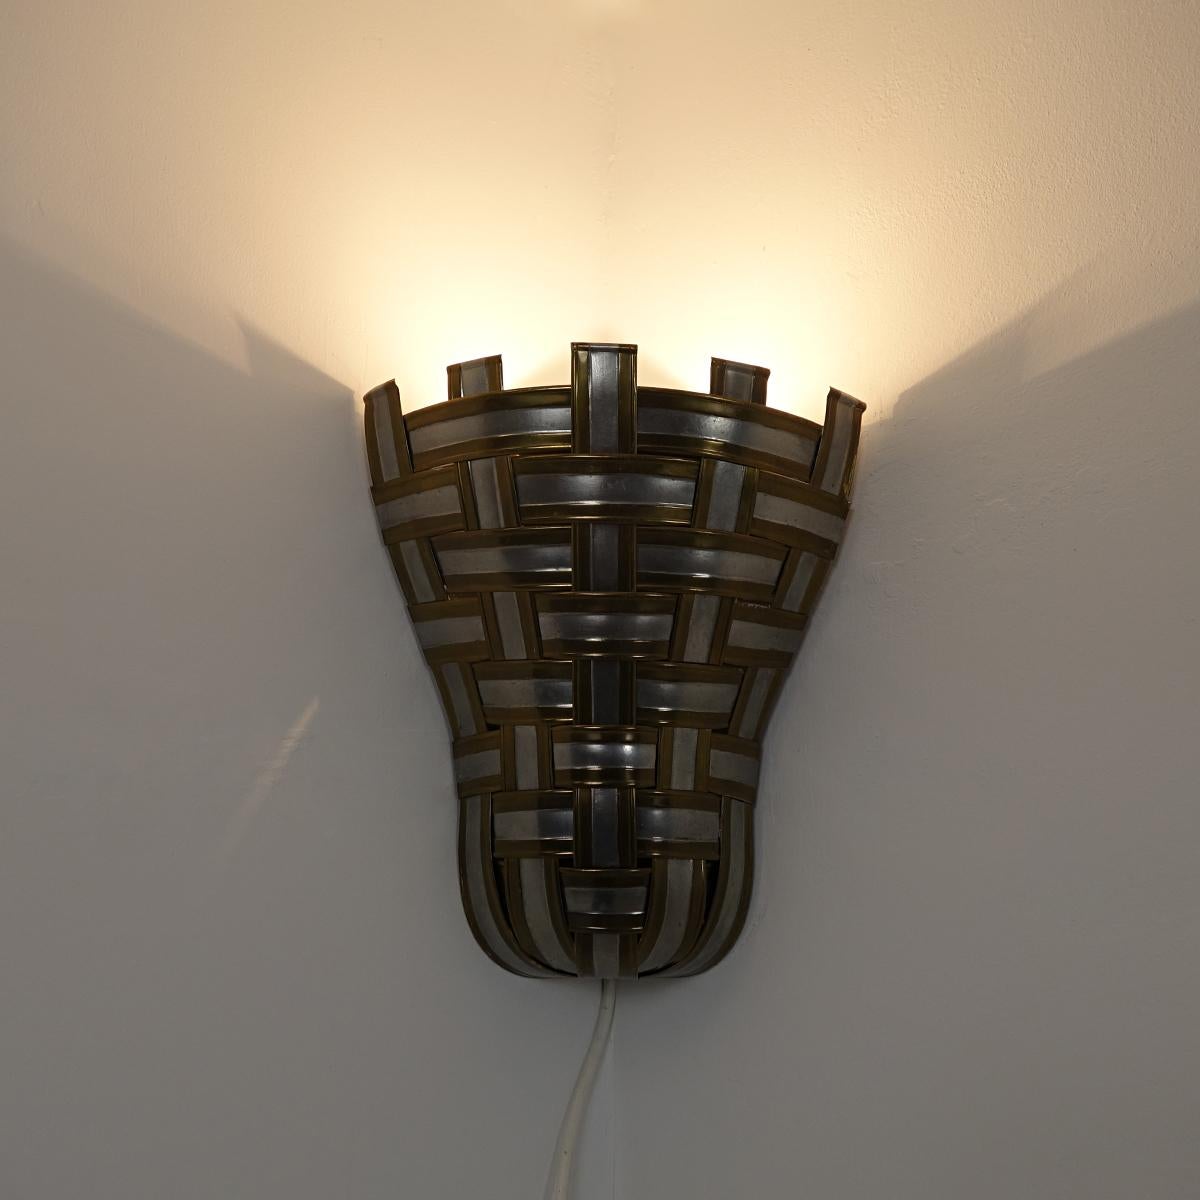 Set of 4 Hollywood Regency Corner Sconces Made of Interwoven Aluminium and Brass For Sale 1